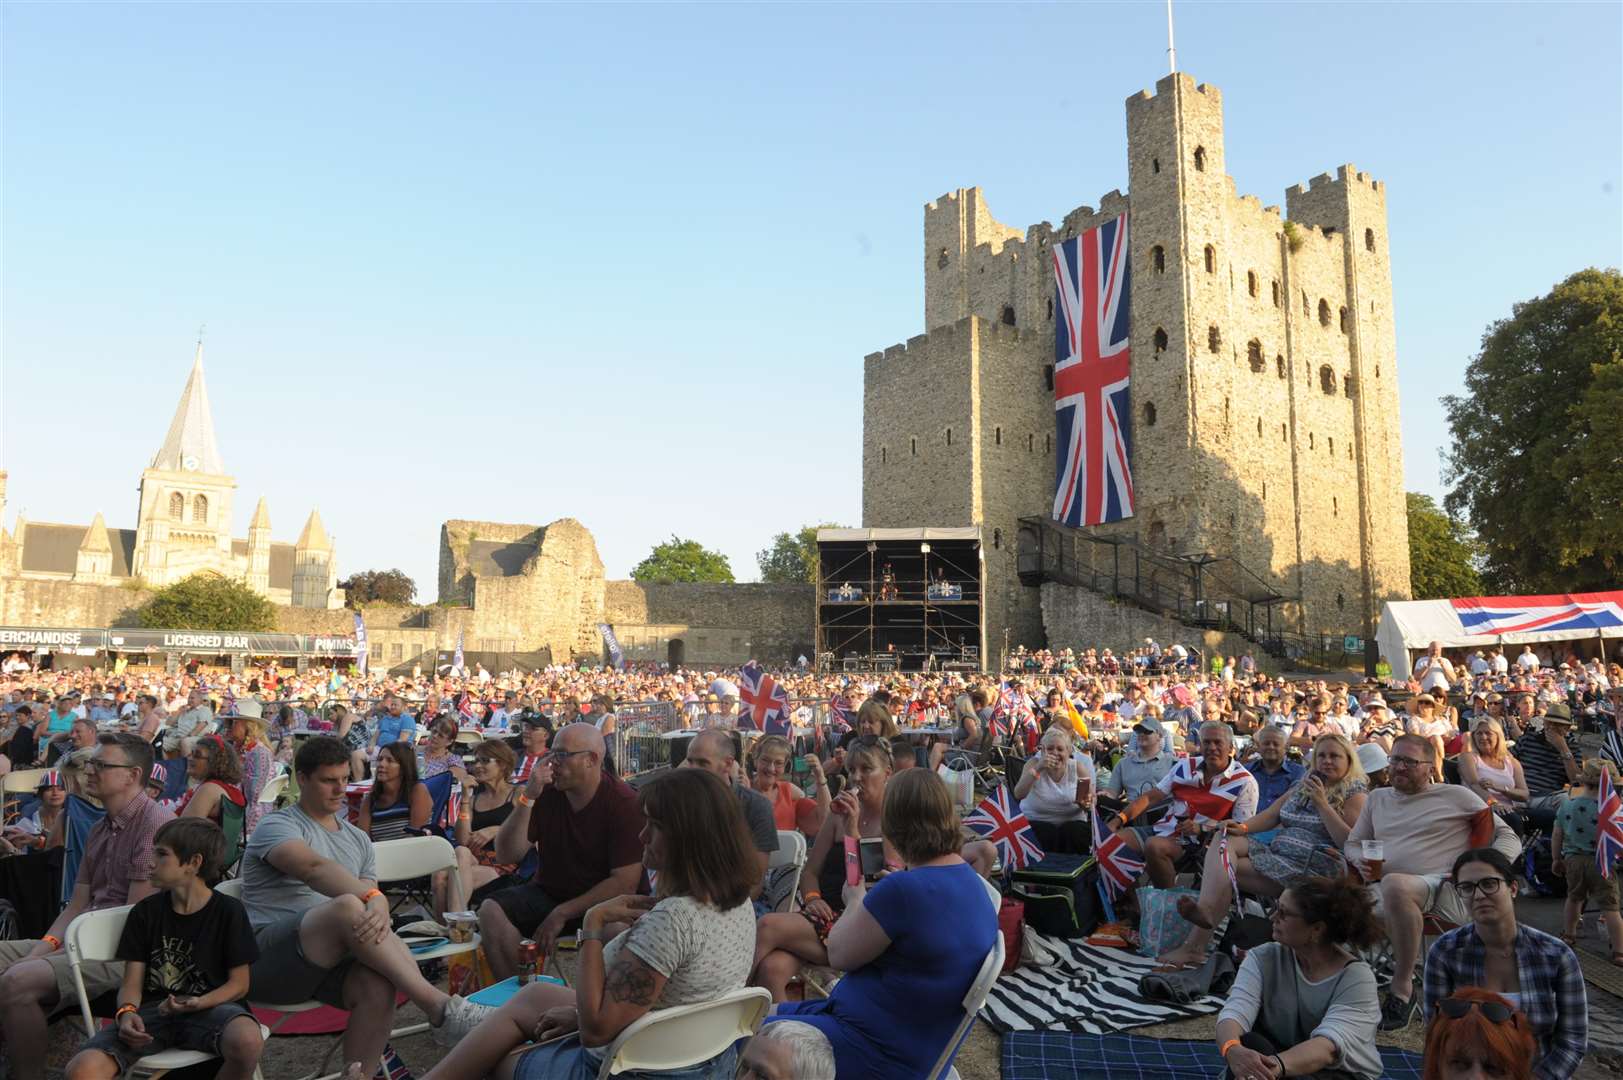 Royal Philarmonic Orchestra gets audience at Rochester Castle bursting with national pride